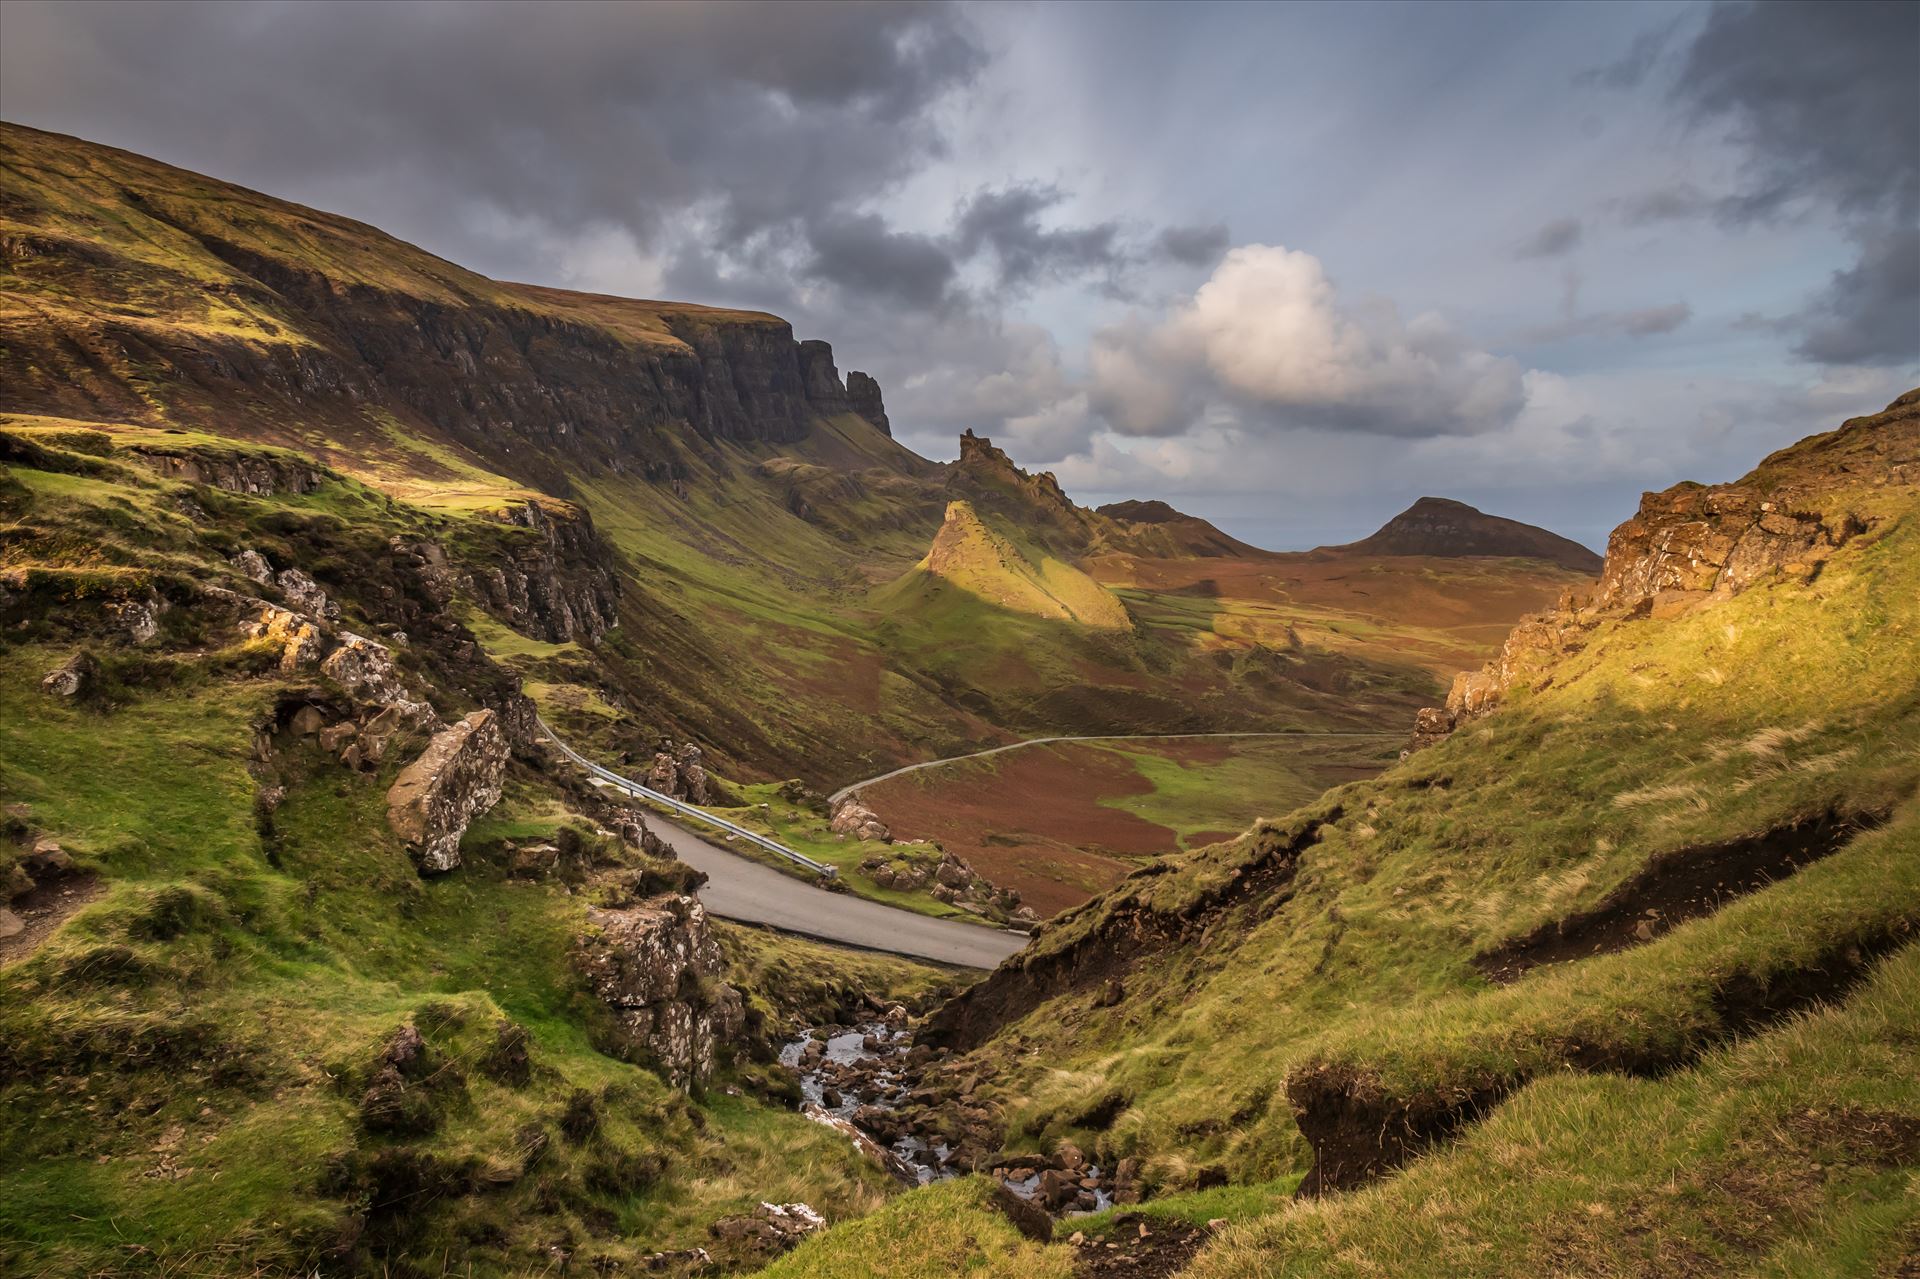 The Quiraing (1) - The Quiraing is a landslip on the northernmost summit of the Trotternish on the Isle of Skye. The whole of the Trotternish Ridge escarpment was formed by a great series of landslips, the Quiraing is the only part of the slip still moving. by philreay